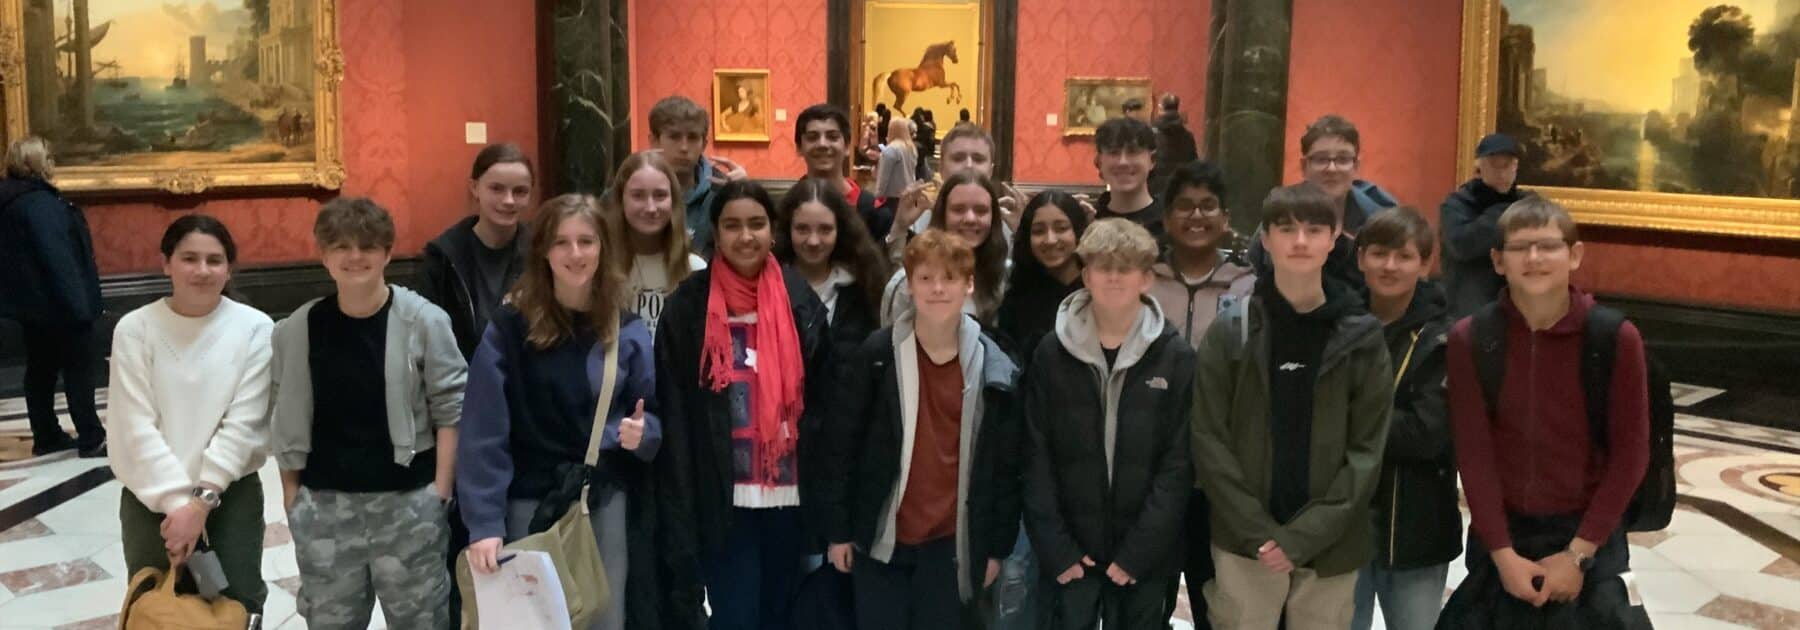 Scholarship Society’s Day Out in London